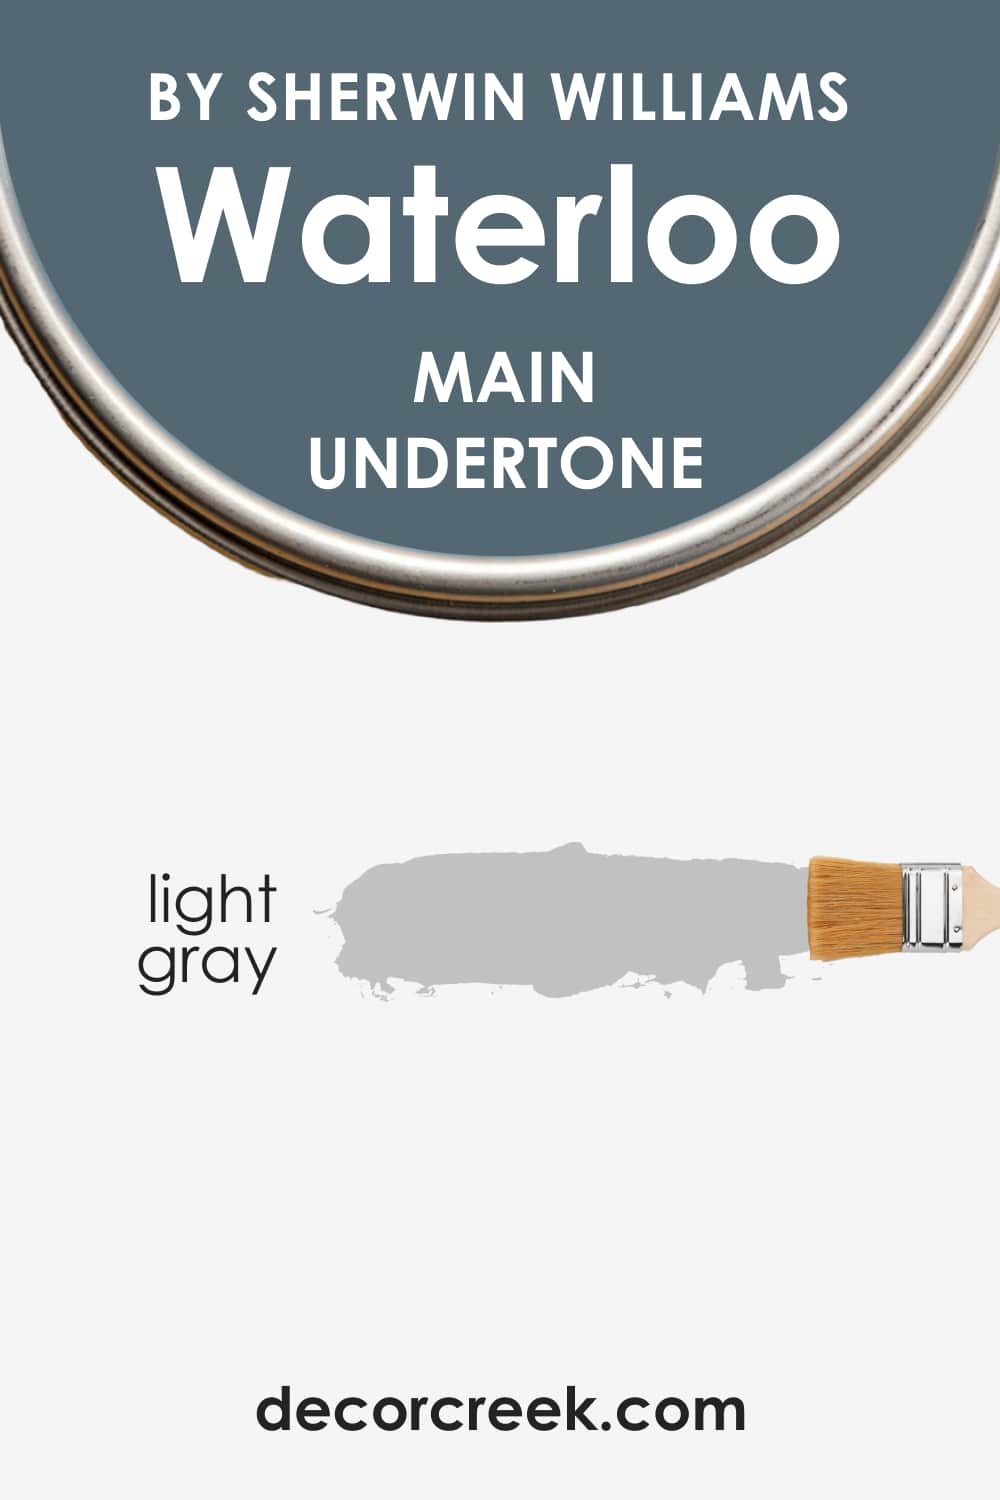 What Undertones Does Sherwin-Williams Waterloo Paint Color Have?